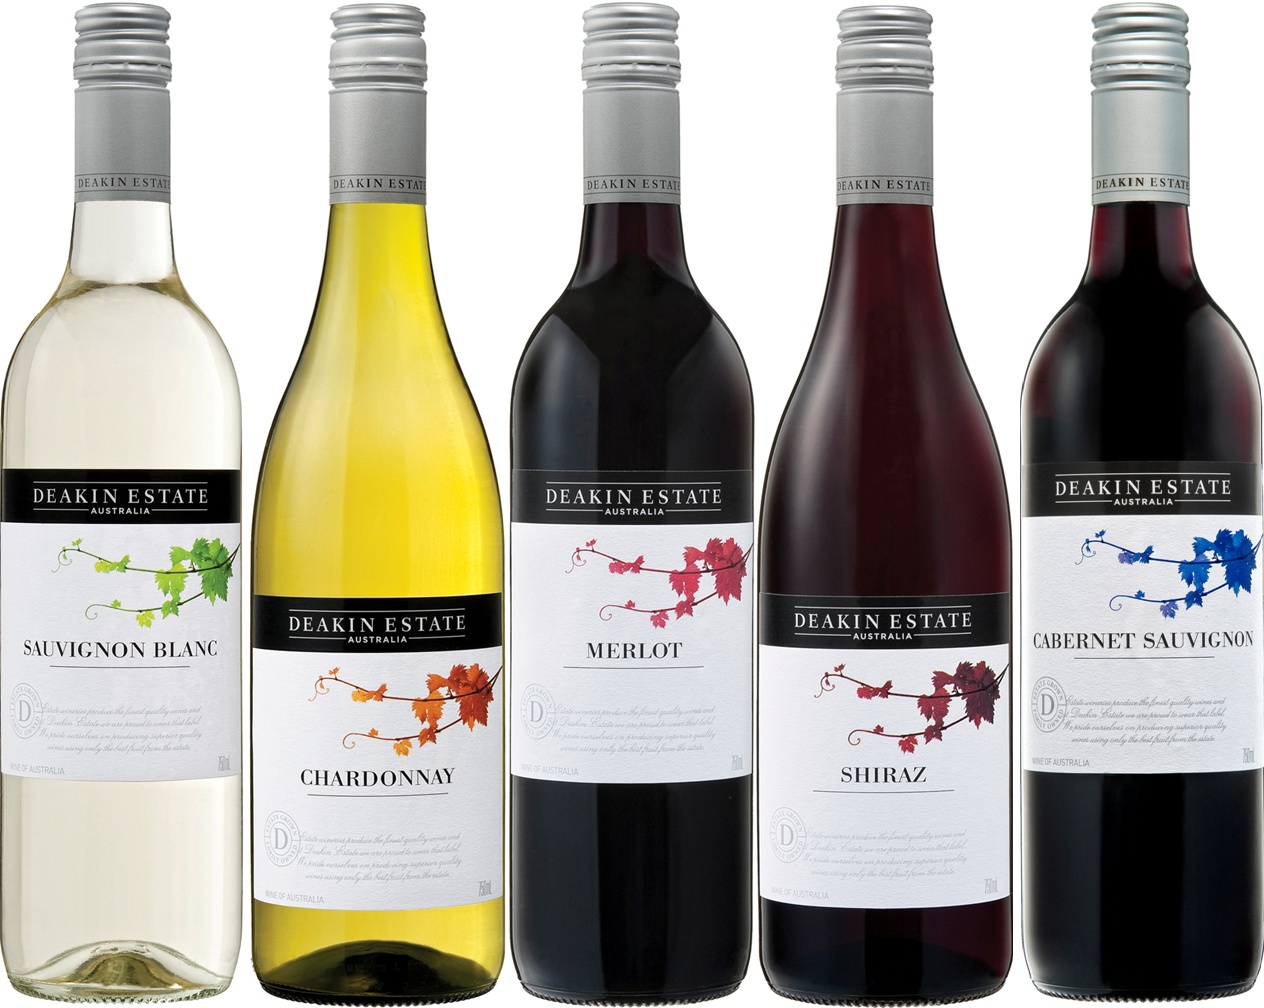 Deakin Estate offers lighter, balanced and subtle wines with real regional character